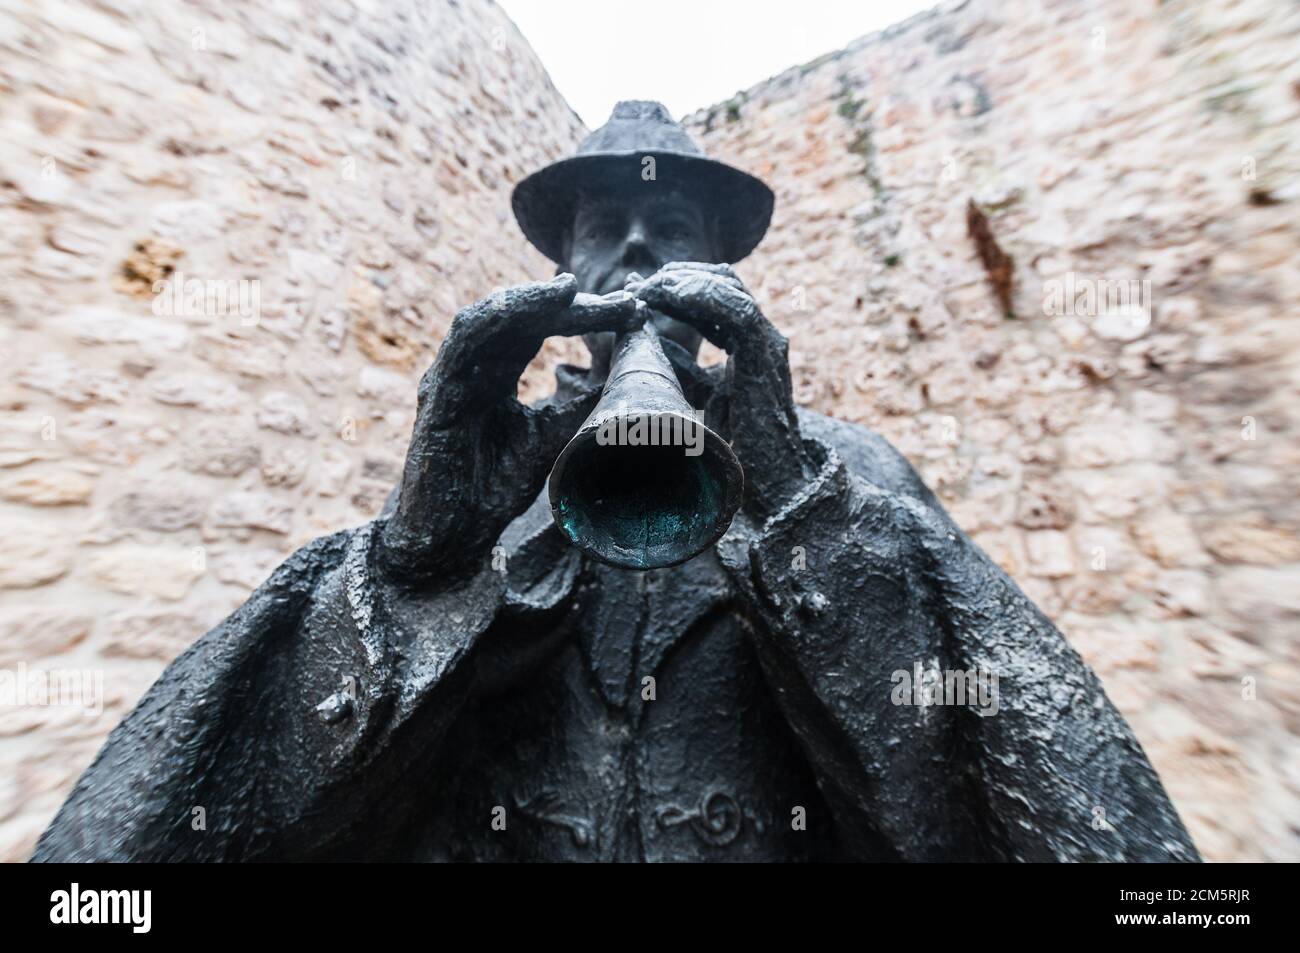 Bronze statue of a traditional folk musician playing a typical wind instrument called 'Dulzaina' in front of a stoned wall in Burgos, Spain. Stock Photo